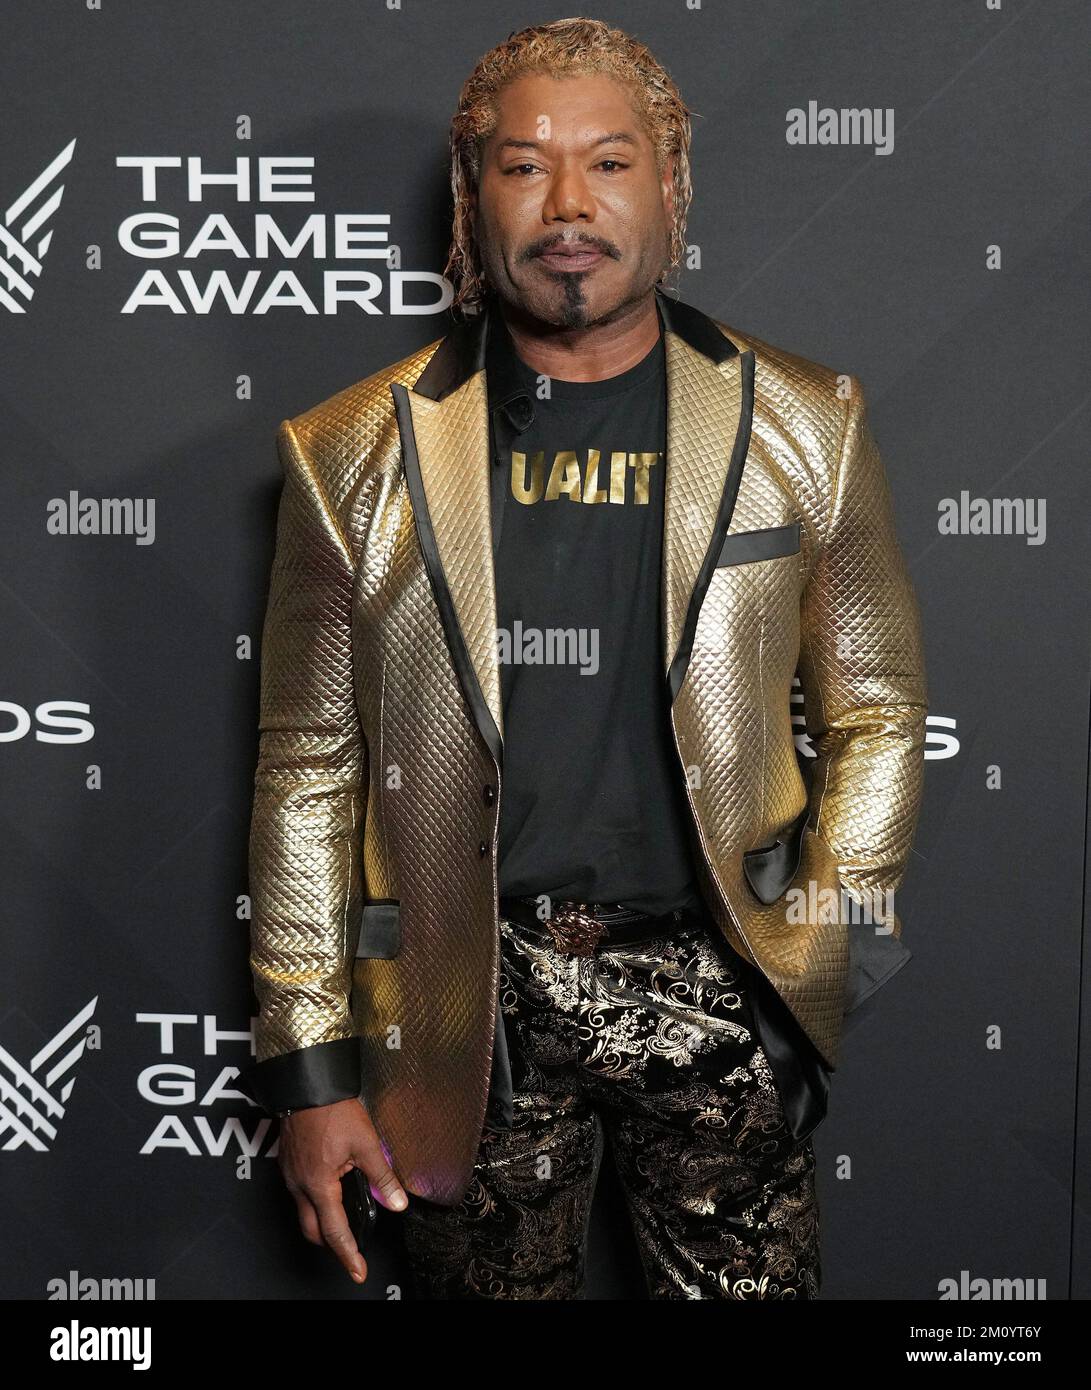 The Game Awards on X: Best performance winner Christopher Judge arriving  at #TheGameAwards earlier this month.  / X